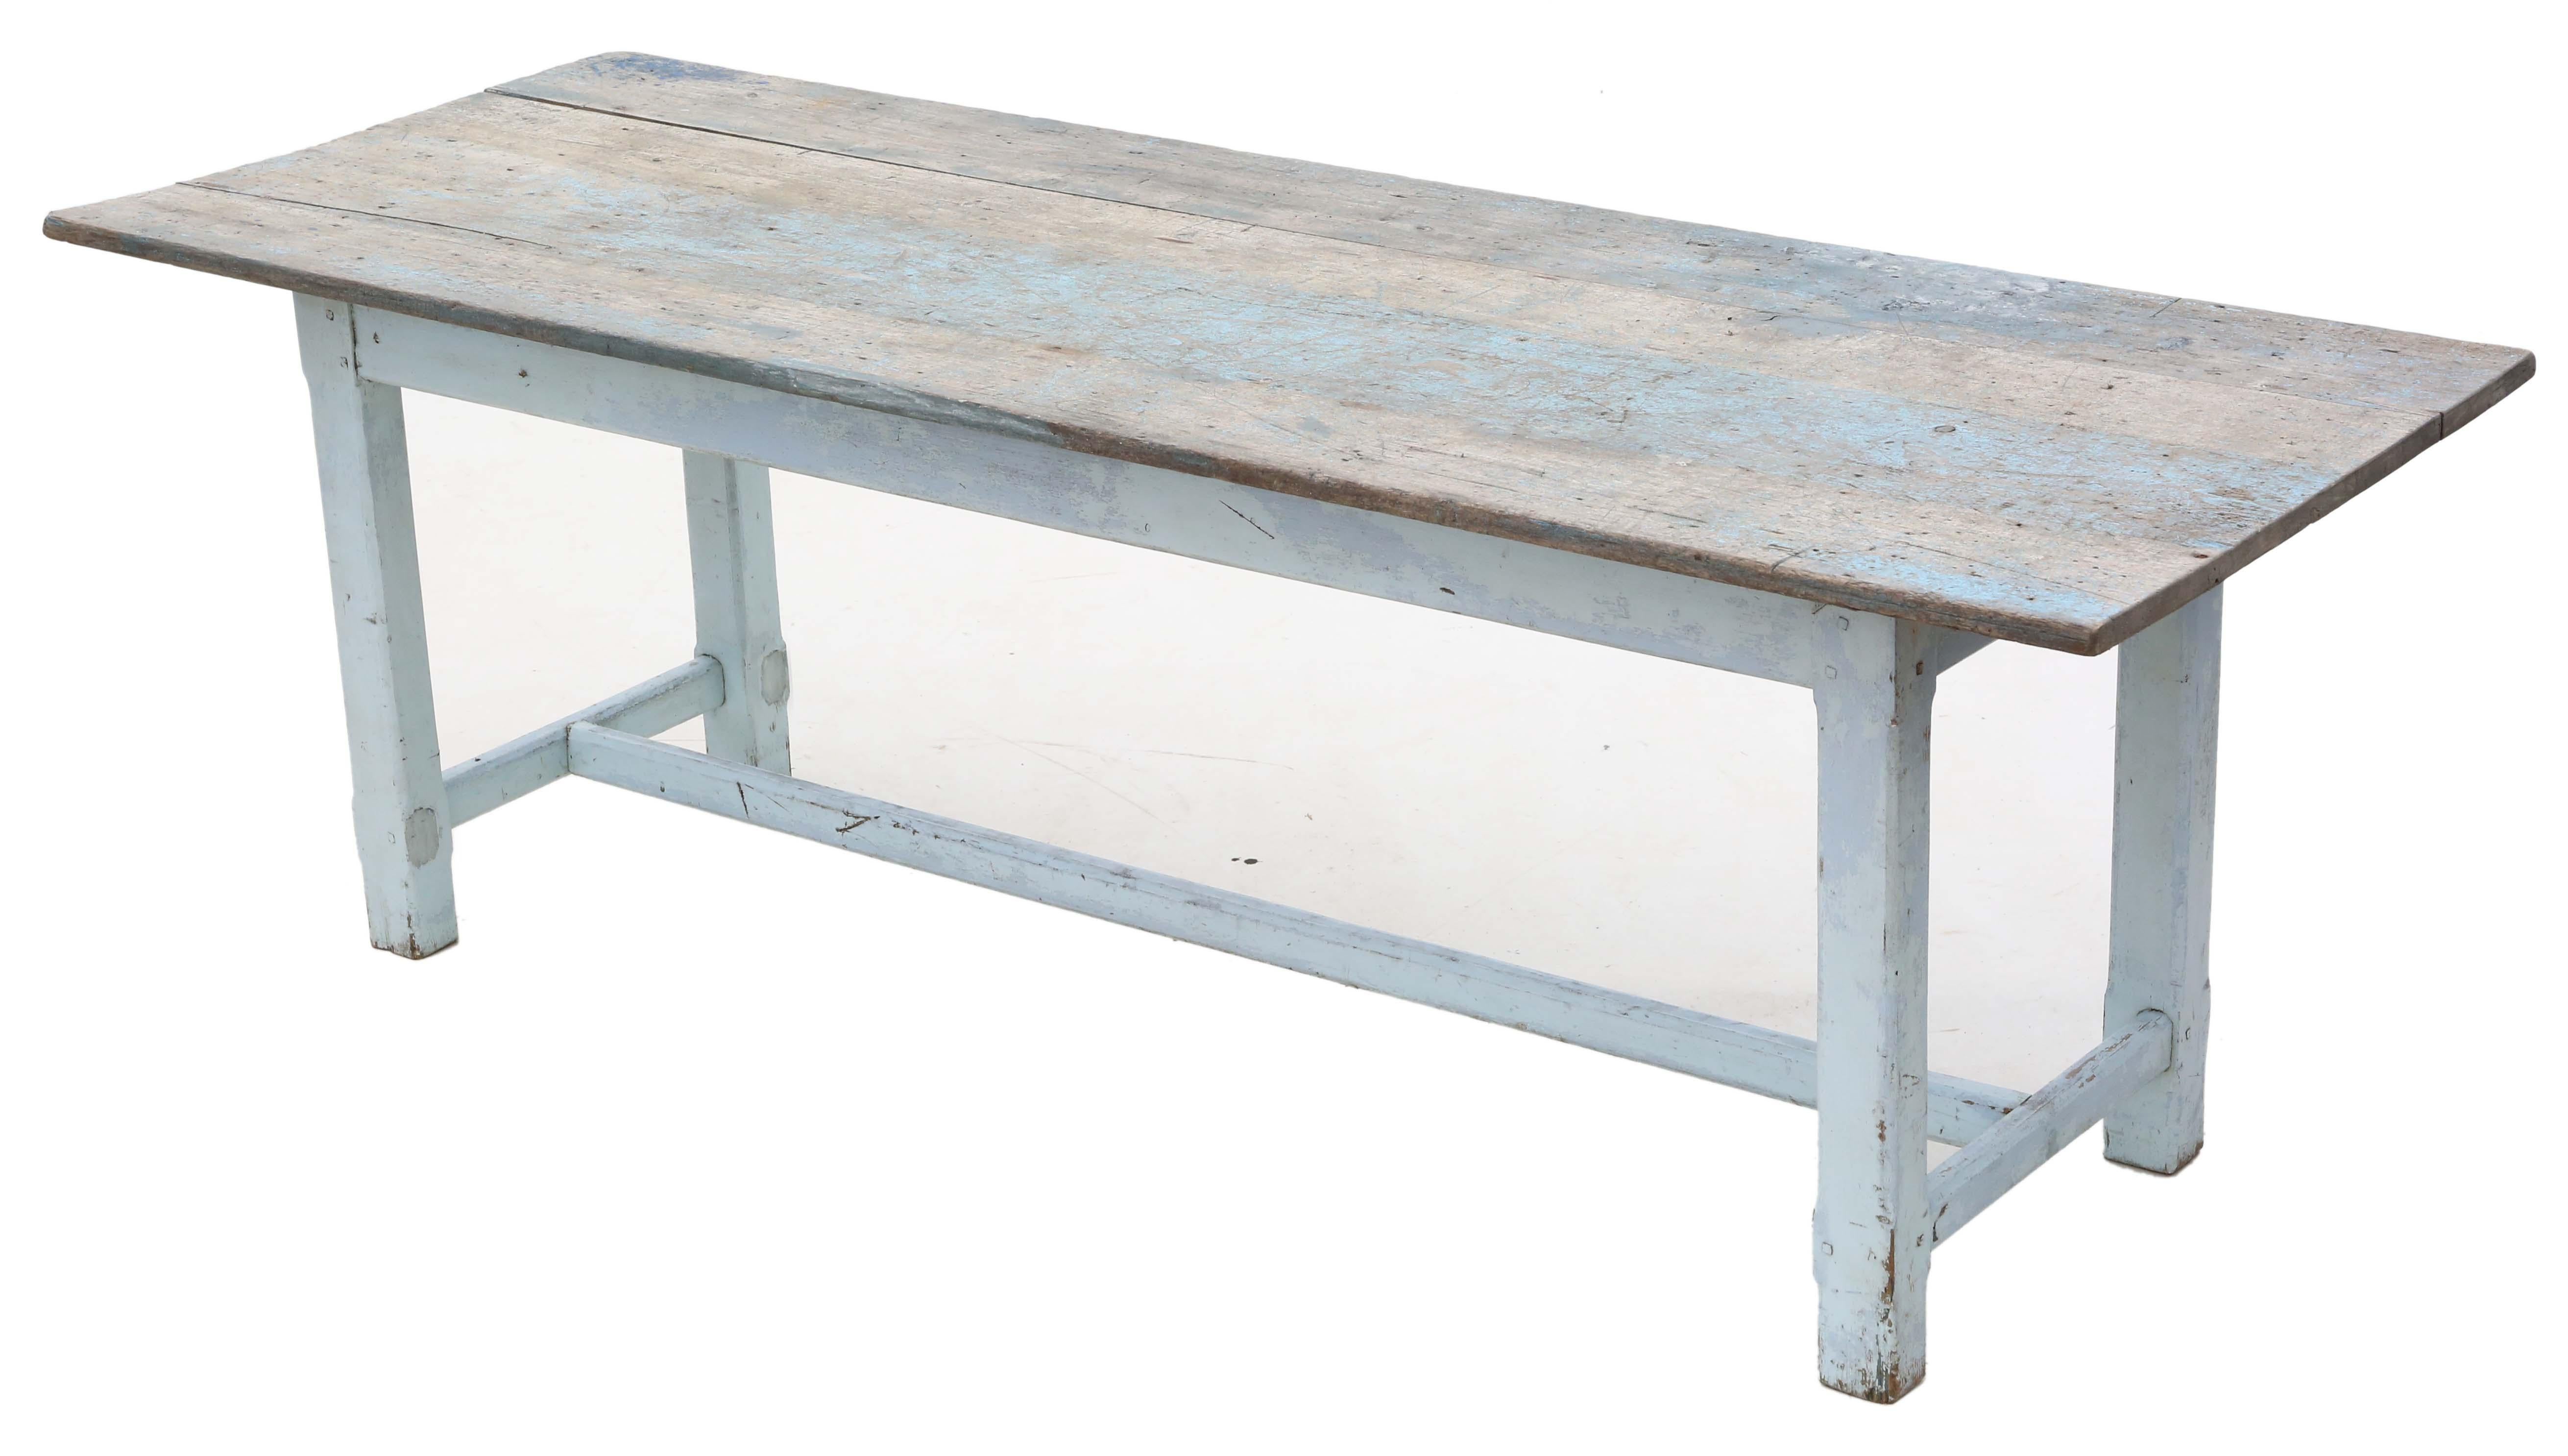 Early 20th Century Antique 7' Painted Refectory Kitchen Garden Dining Table, circa 1900